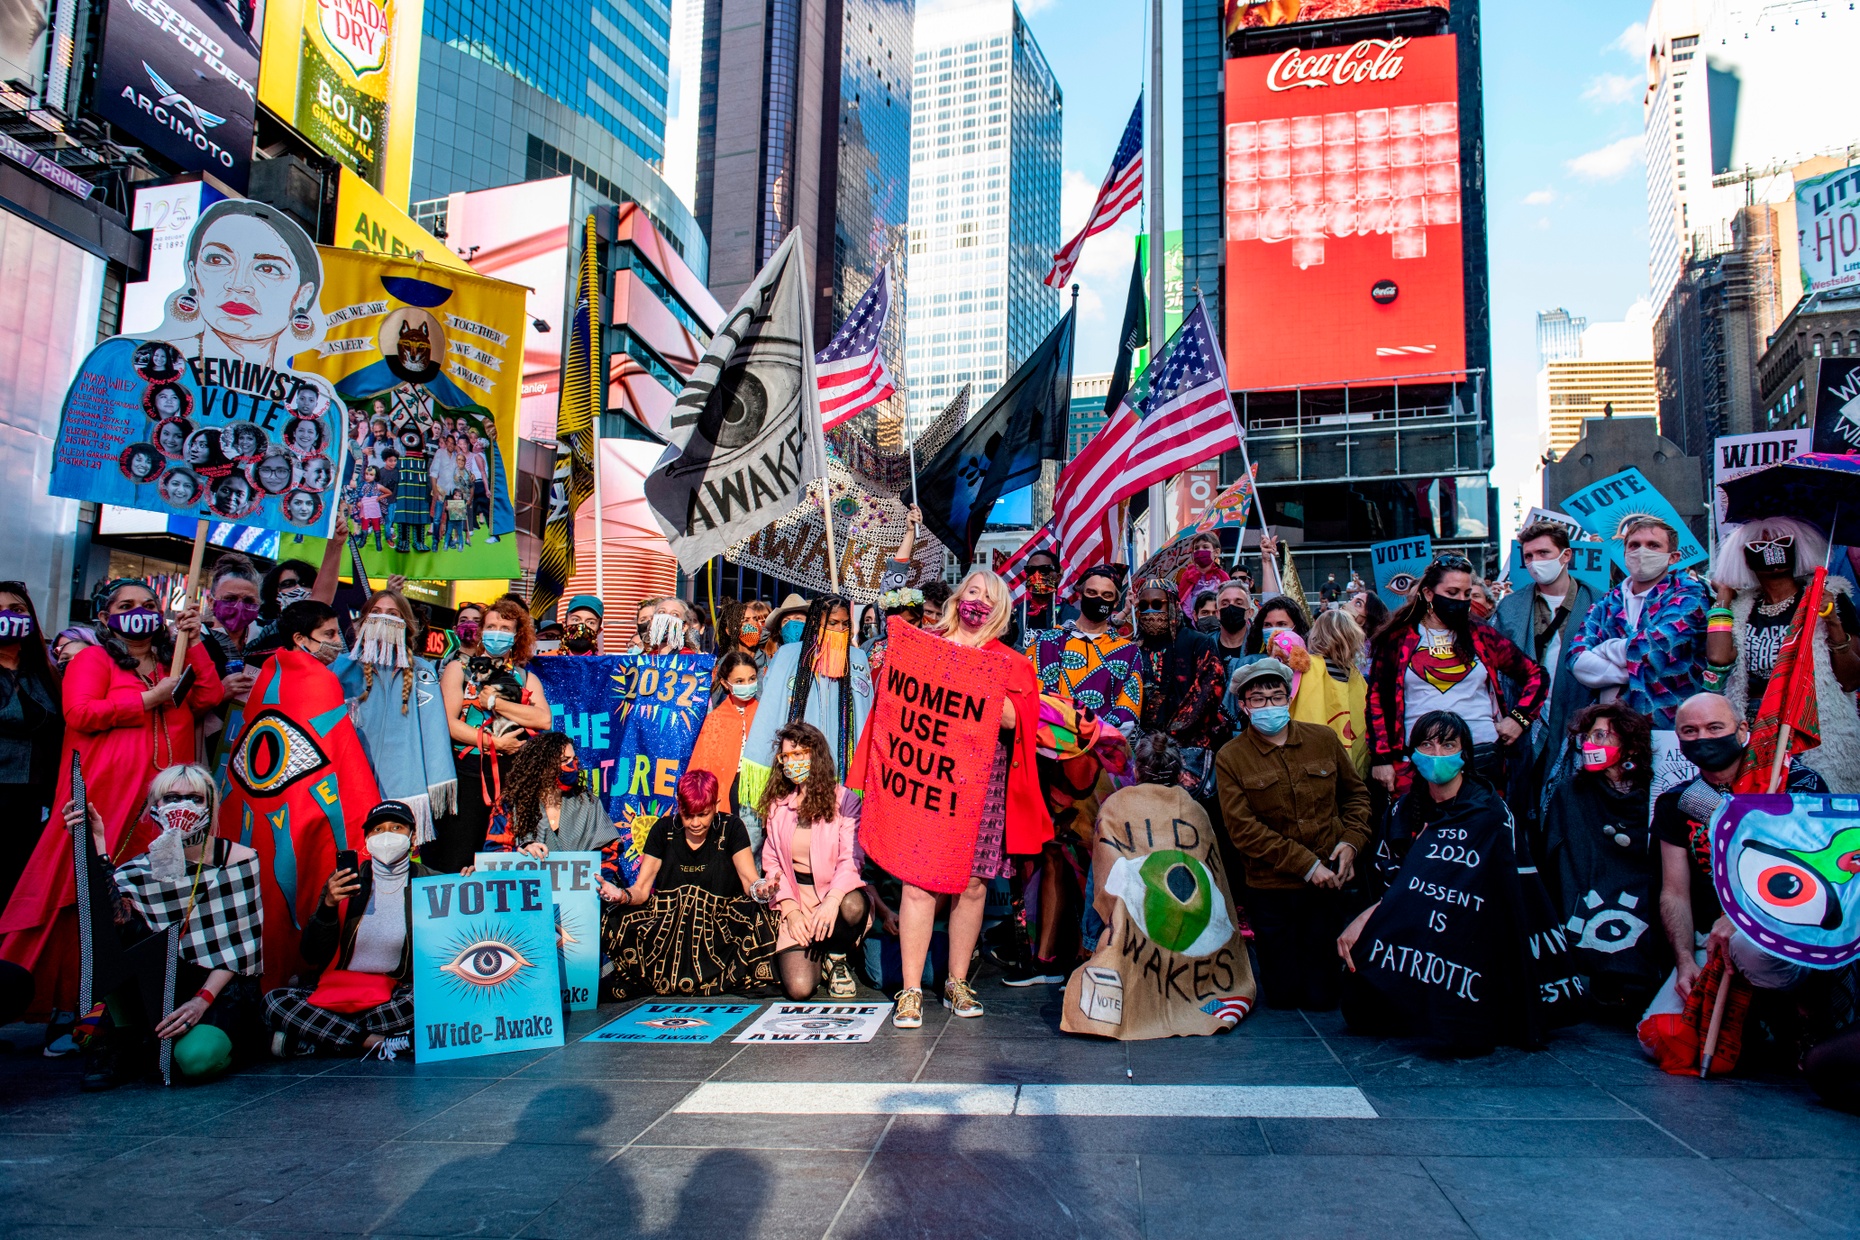 A photograph of a colorfully-dressed crowd in front of skyscrapers, holding flags and banners, including an American Flag, a “WIDE AWAKES.” banner, and a poster saying “WOMEN USE YOUR VOTE!”